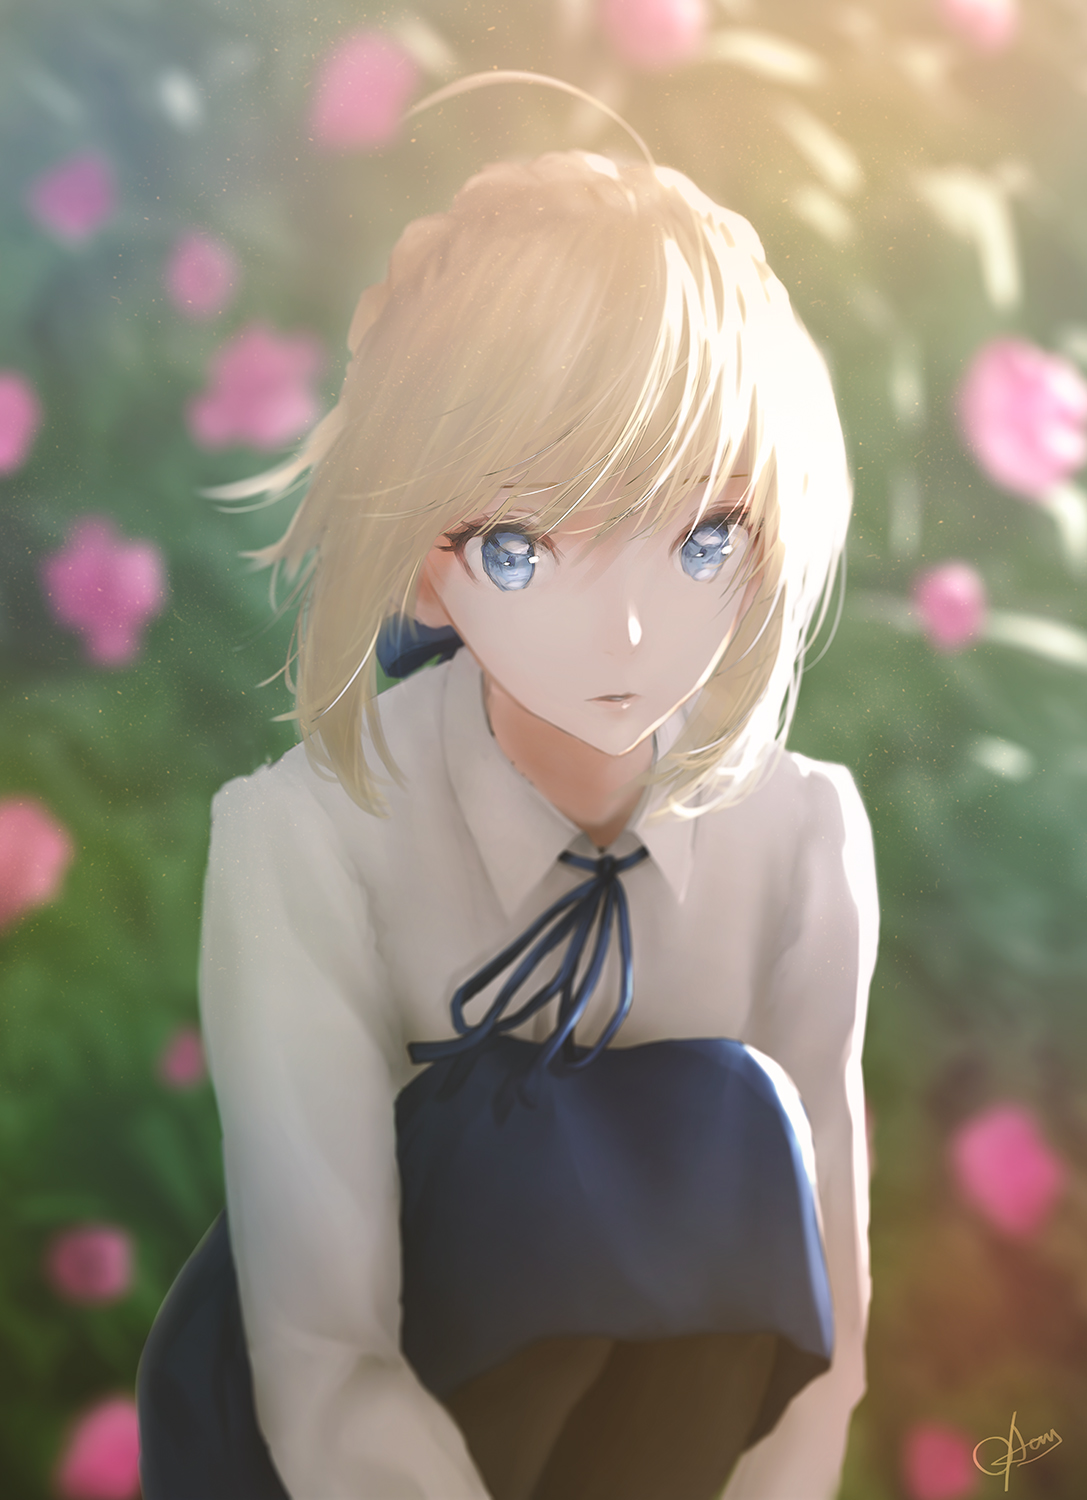 Anime 1087x1500 Fate series Fate/Stay Night anime girls 2D portrait display open mouth looking at viewer blue eyes pink roses Saber fan art blonde artwork Ojay Tkym Artoria Pendragon